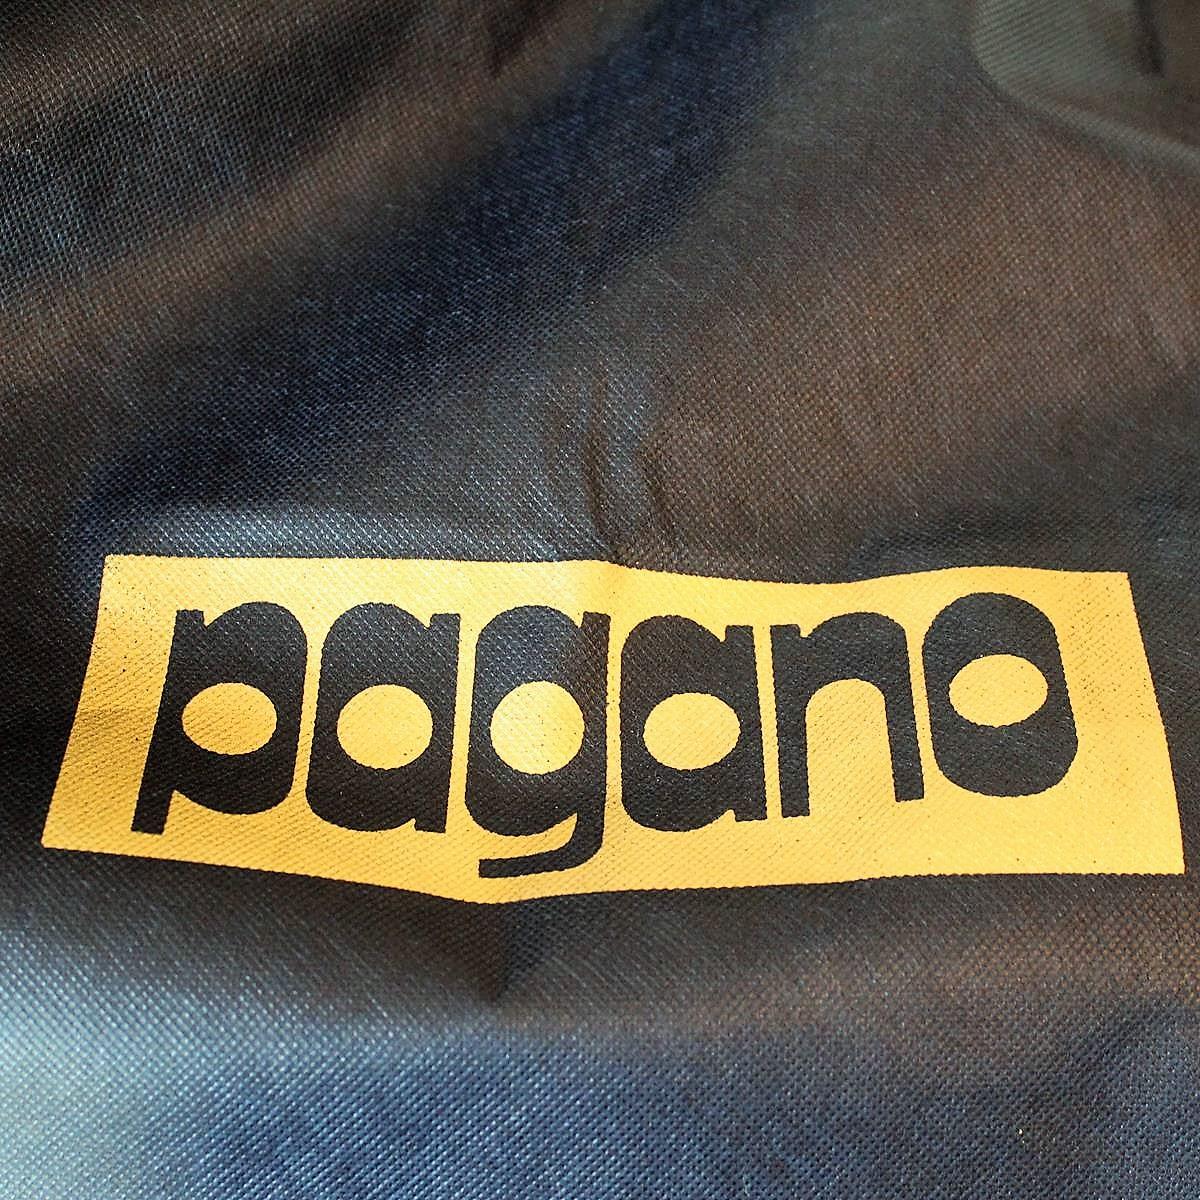 Pagano Reversible Russian Zybeline Size S For Sale 1